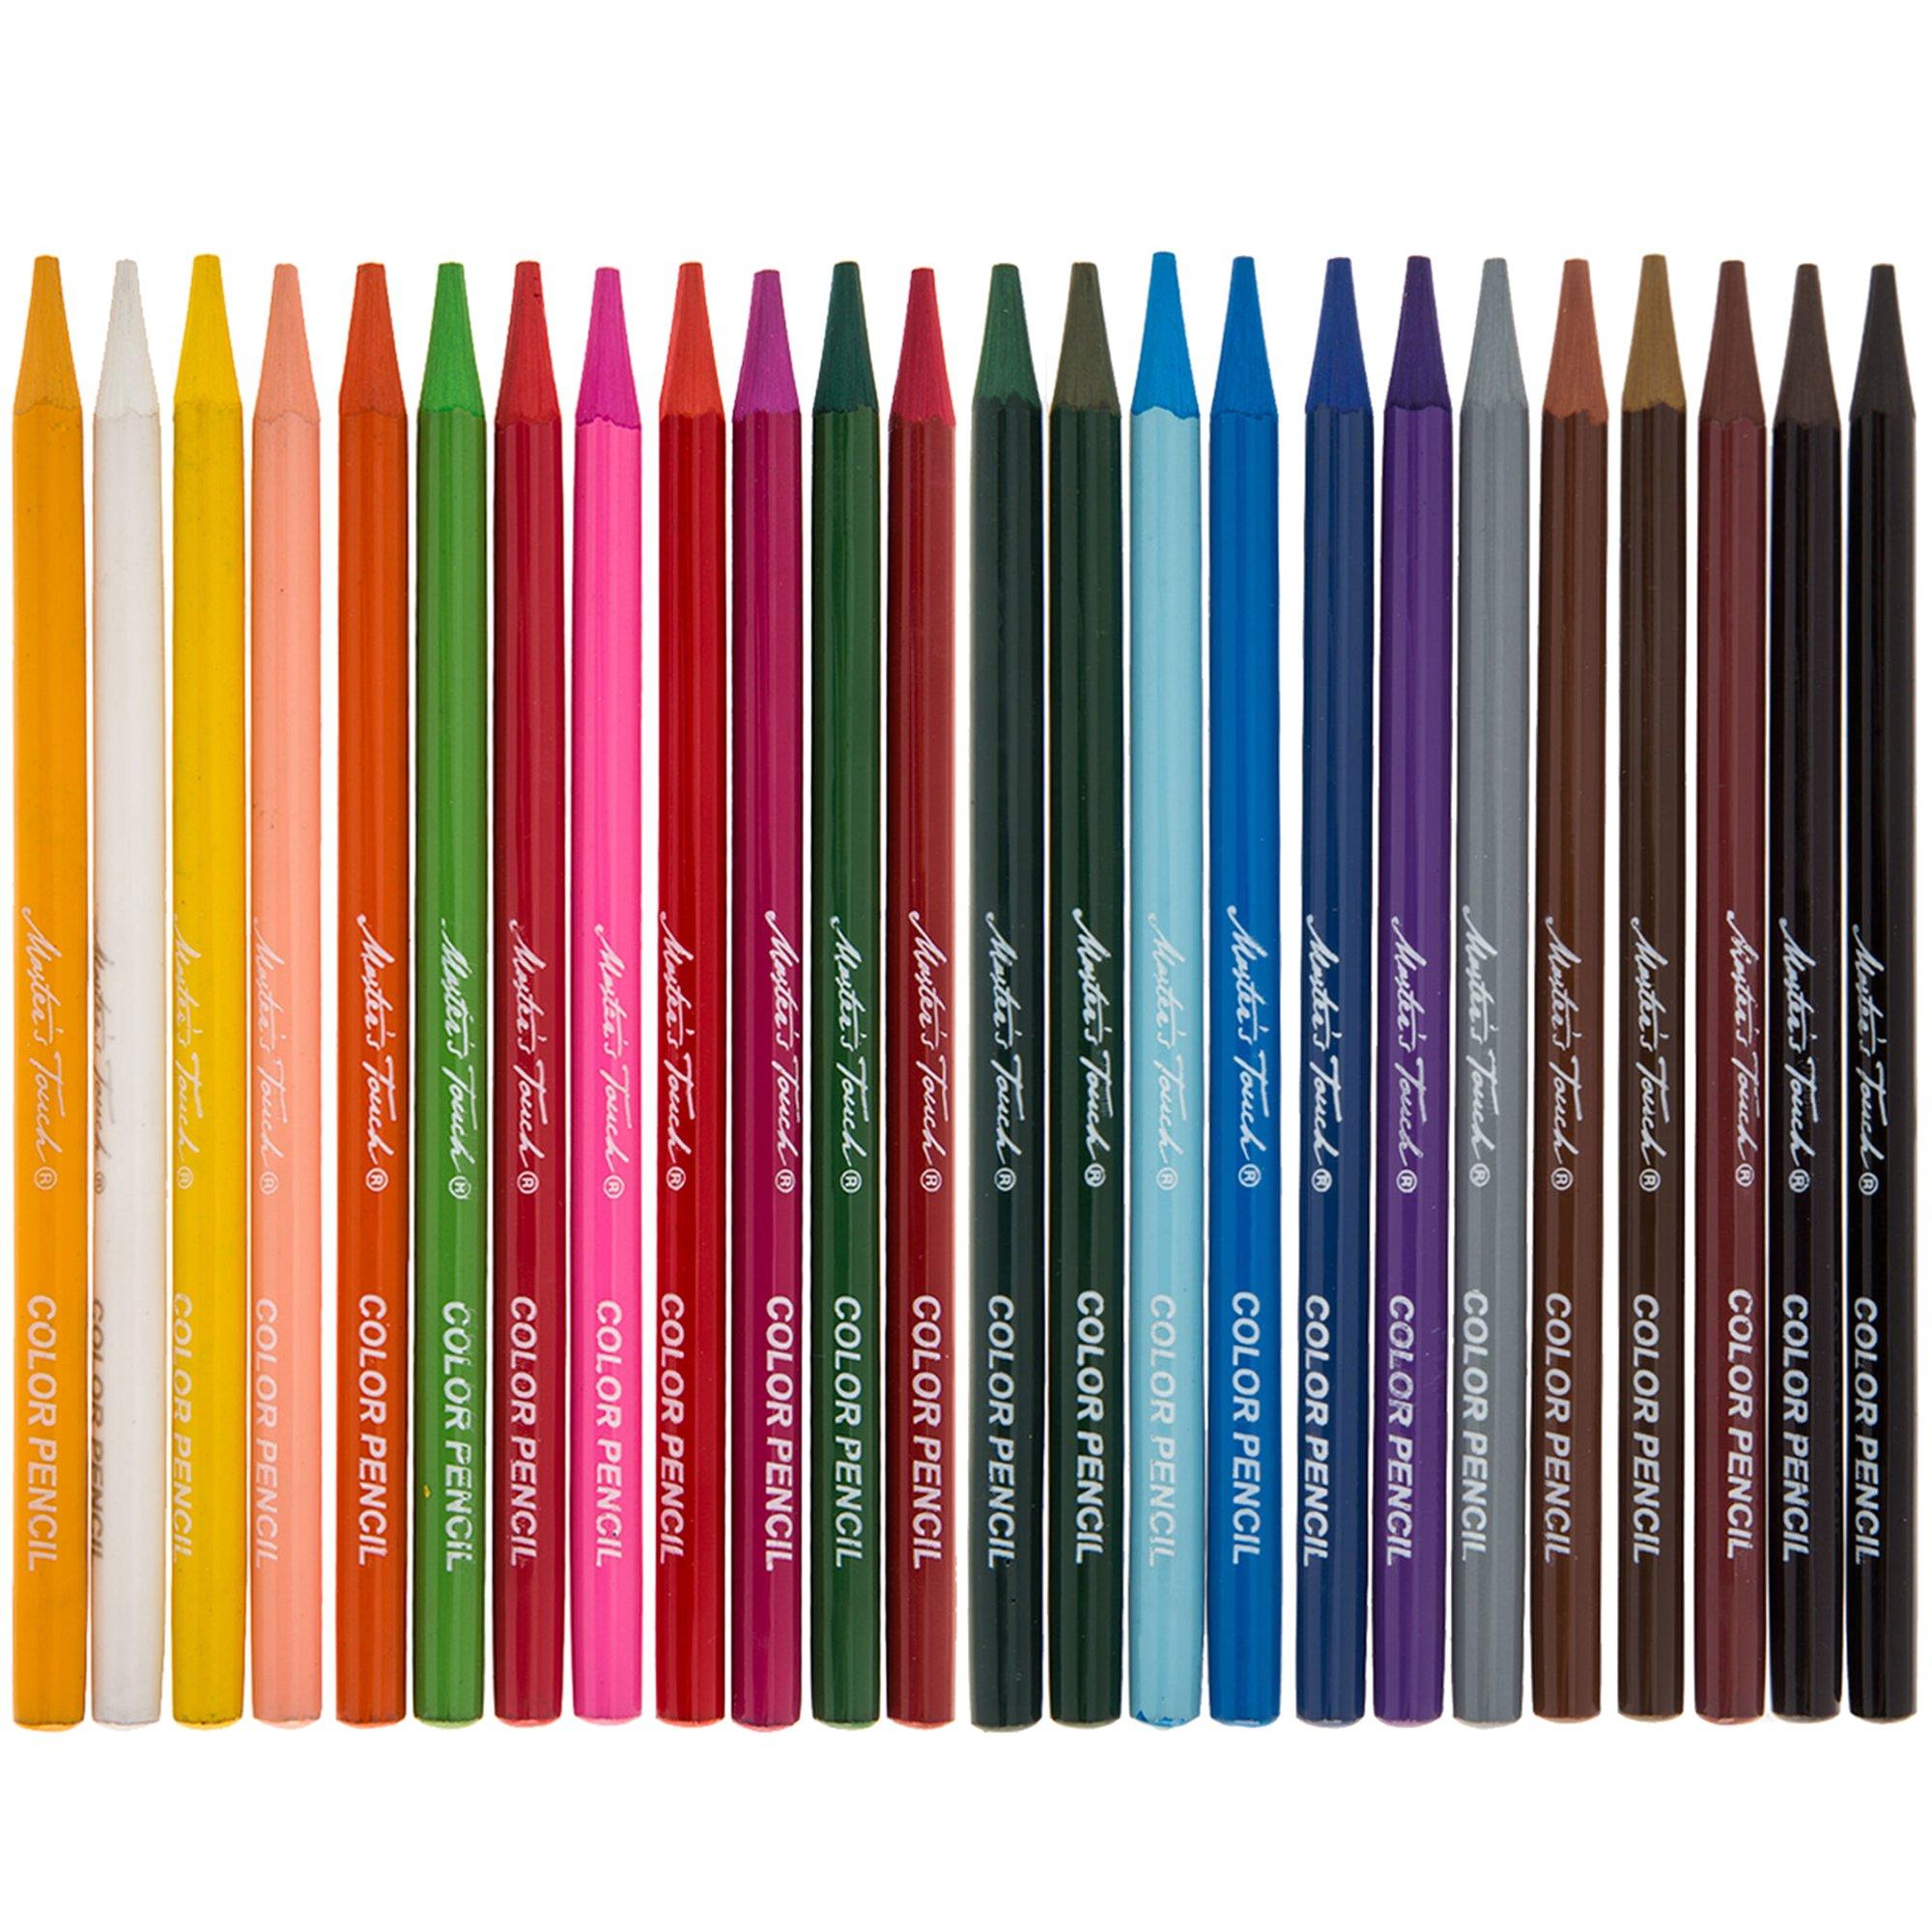 Altenew - Woodless Coloring Pencils